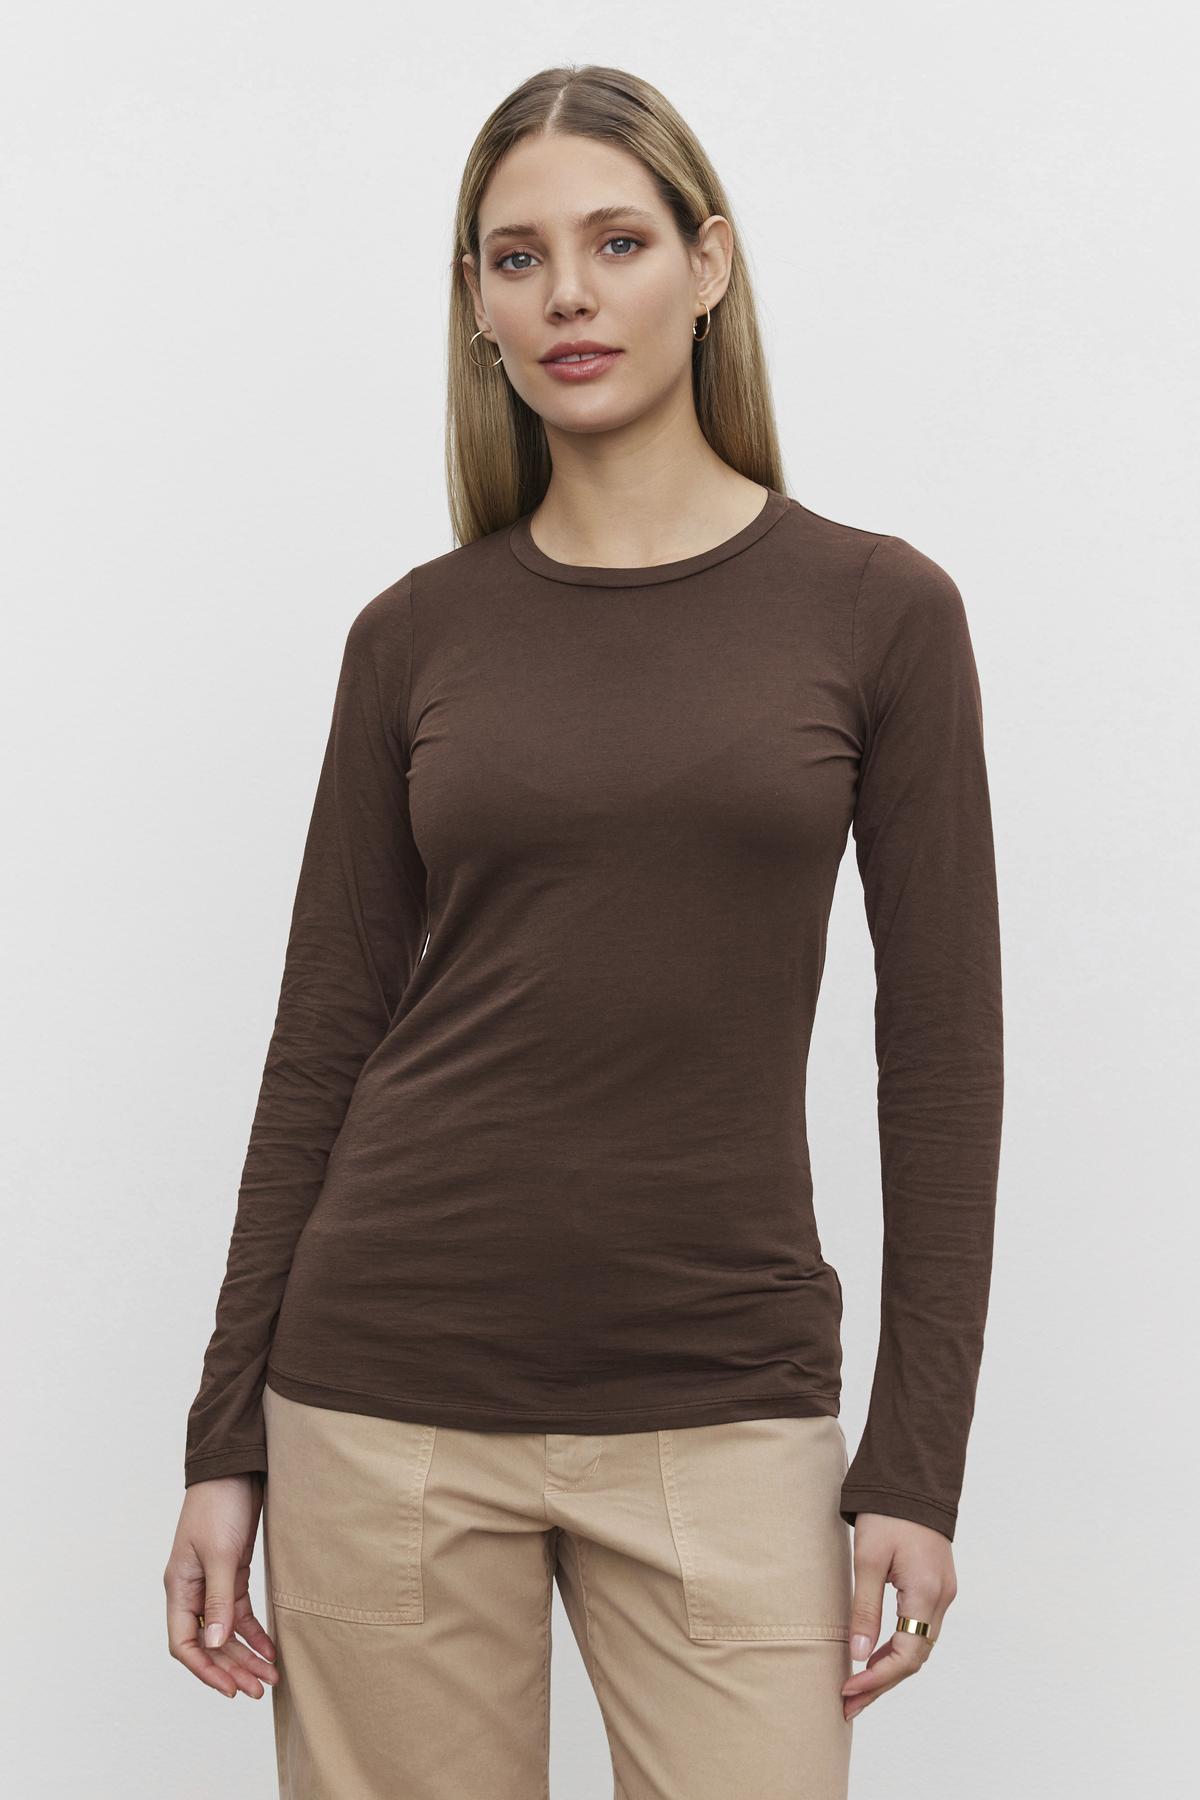   A person with long hair wearing an ultra-soft ZOFINA TEE in whisper brown and beige pants stands against a plain white background. The shirt is from the brand Velvet by Graham & Spencer. 